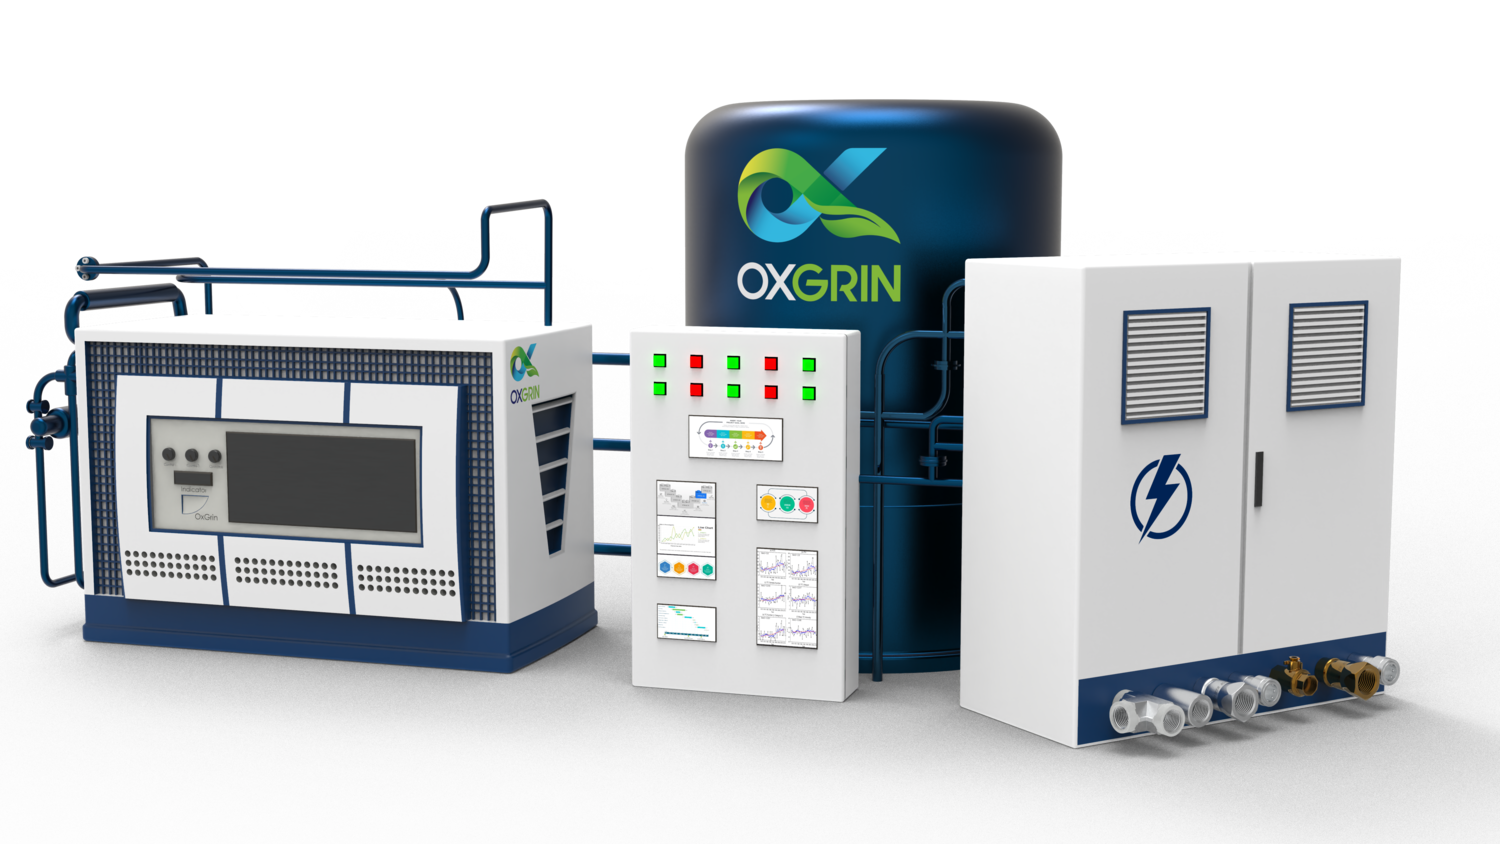 Oxgrin Product climate tech startups to watch